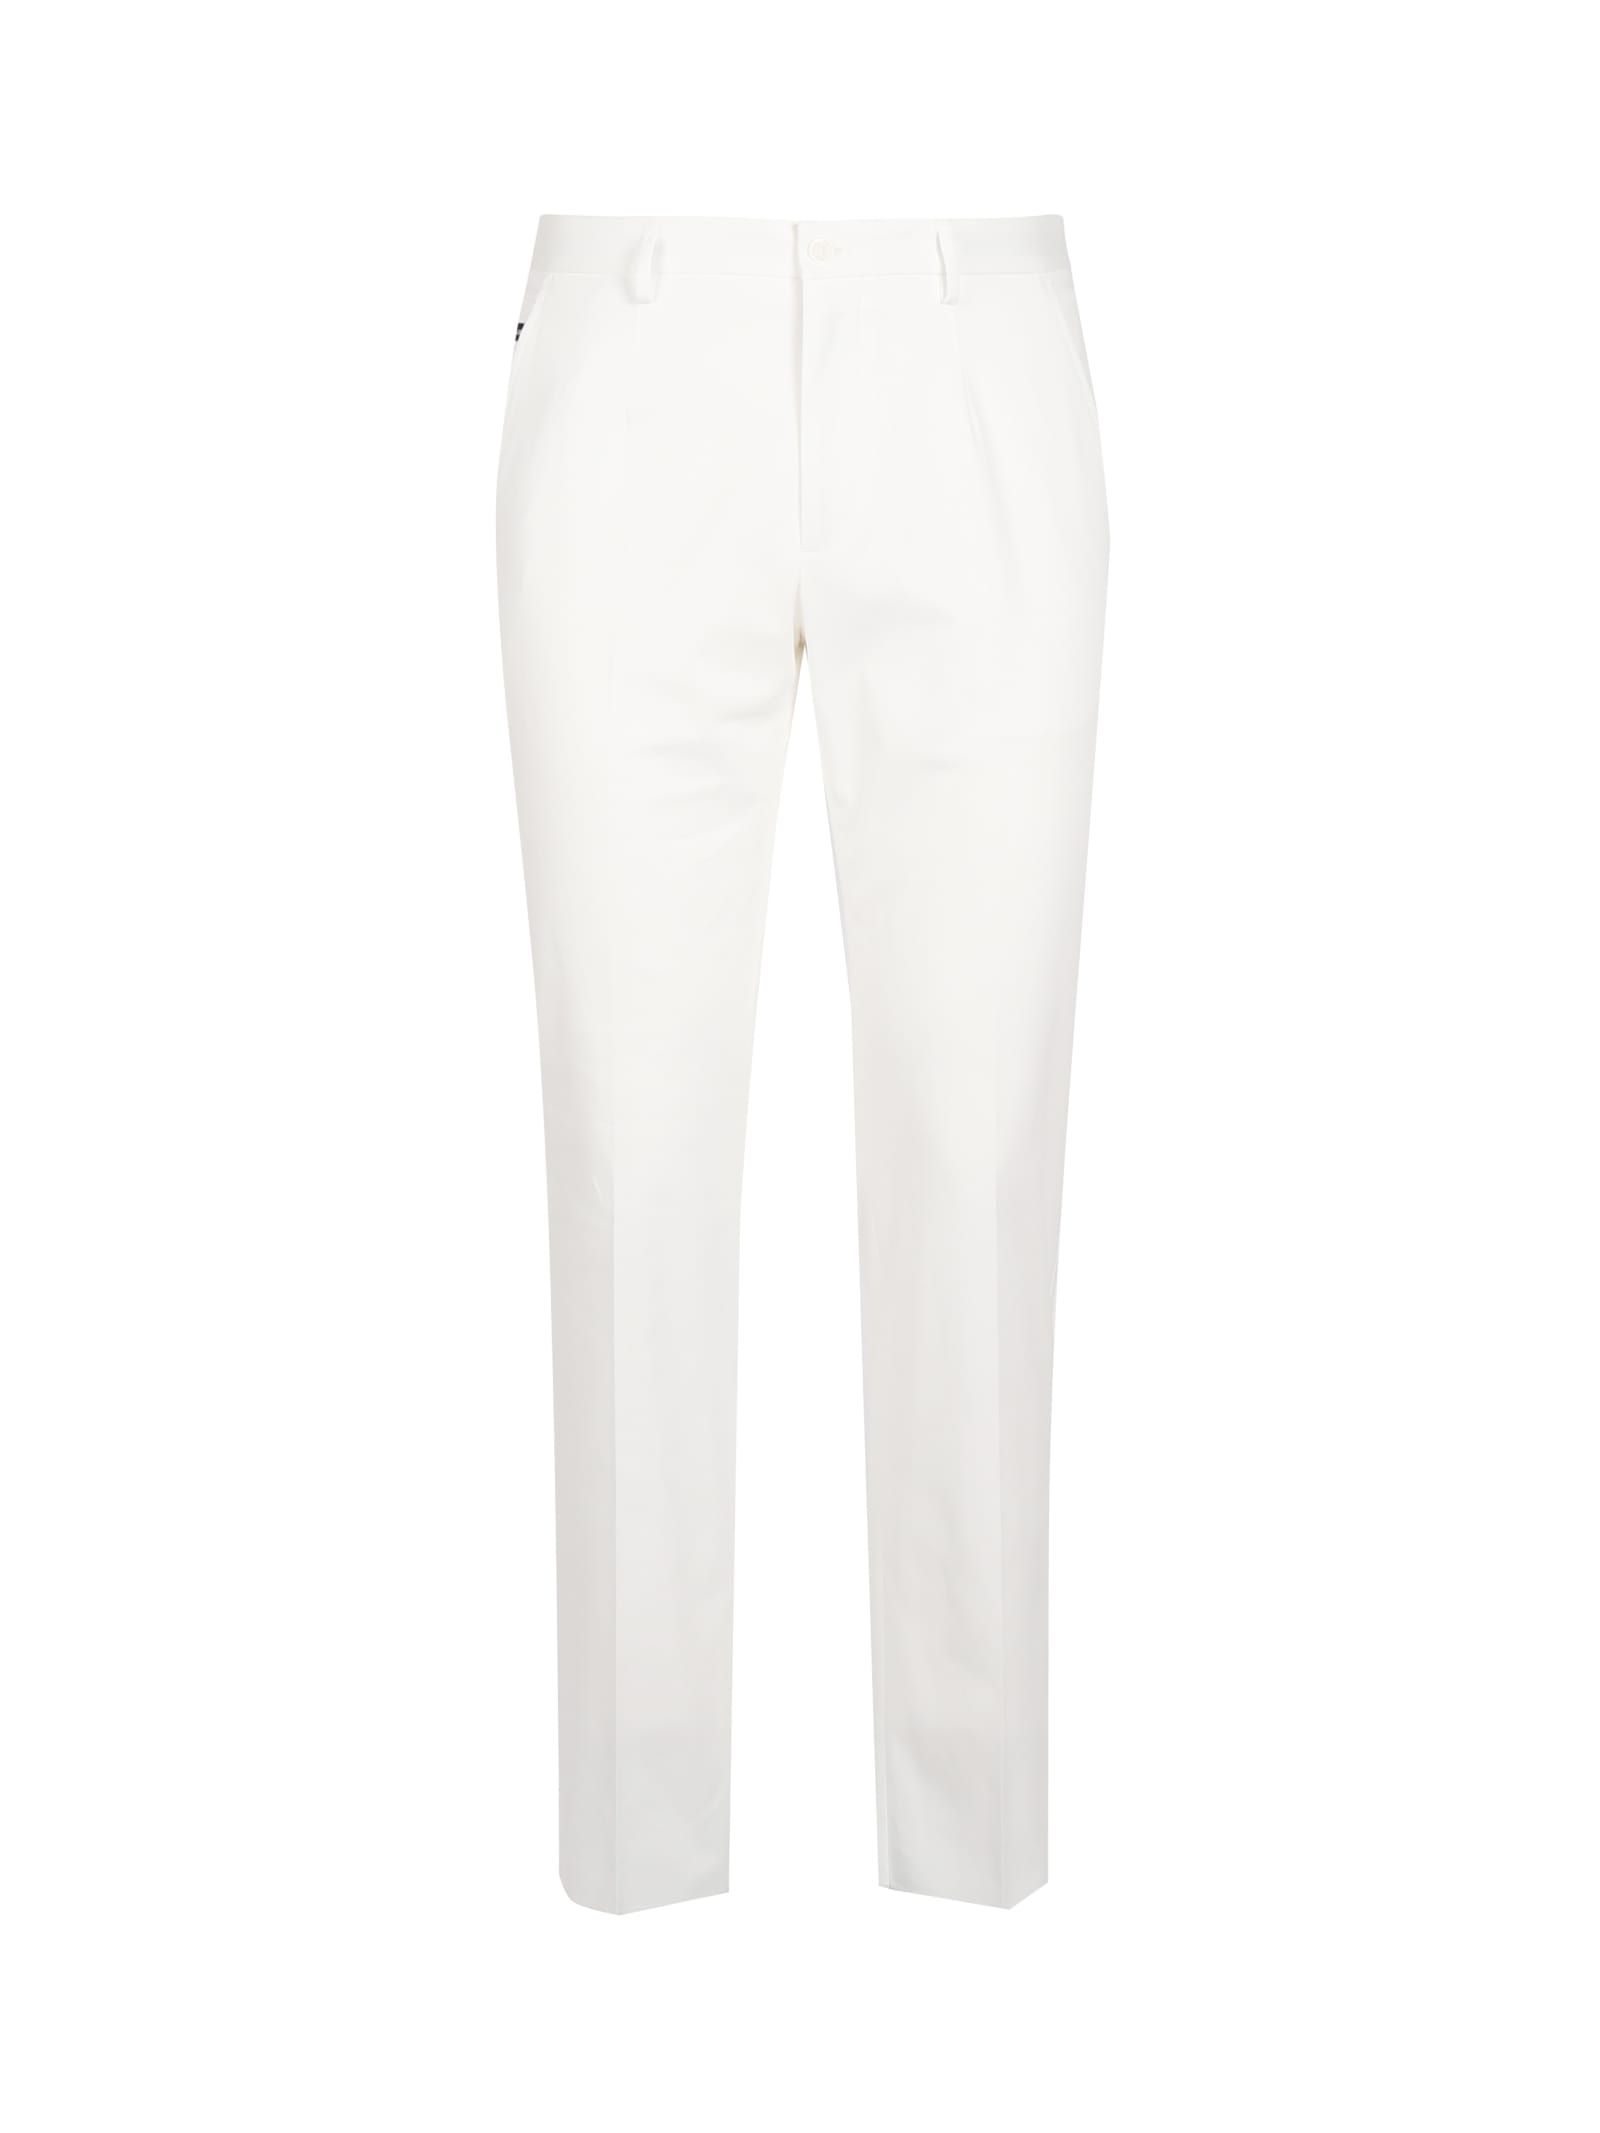 DOLCE & GABBANA STRETCH COTTON TROUSERS WITH LOGOED PLAQUE